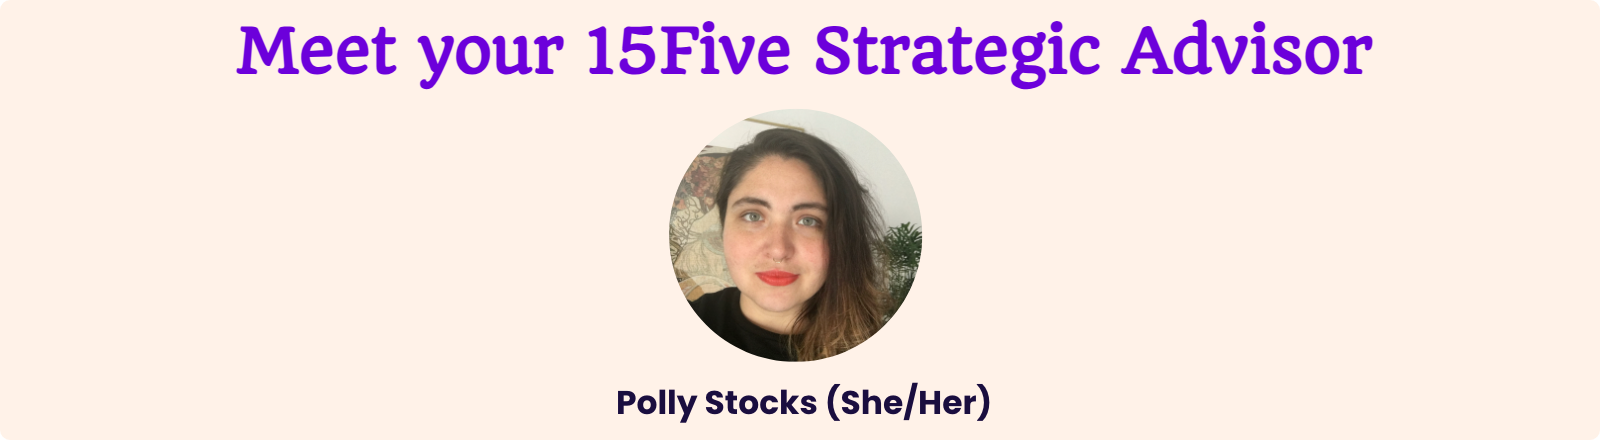 Polly-Stocks.png